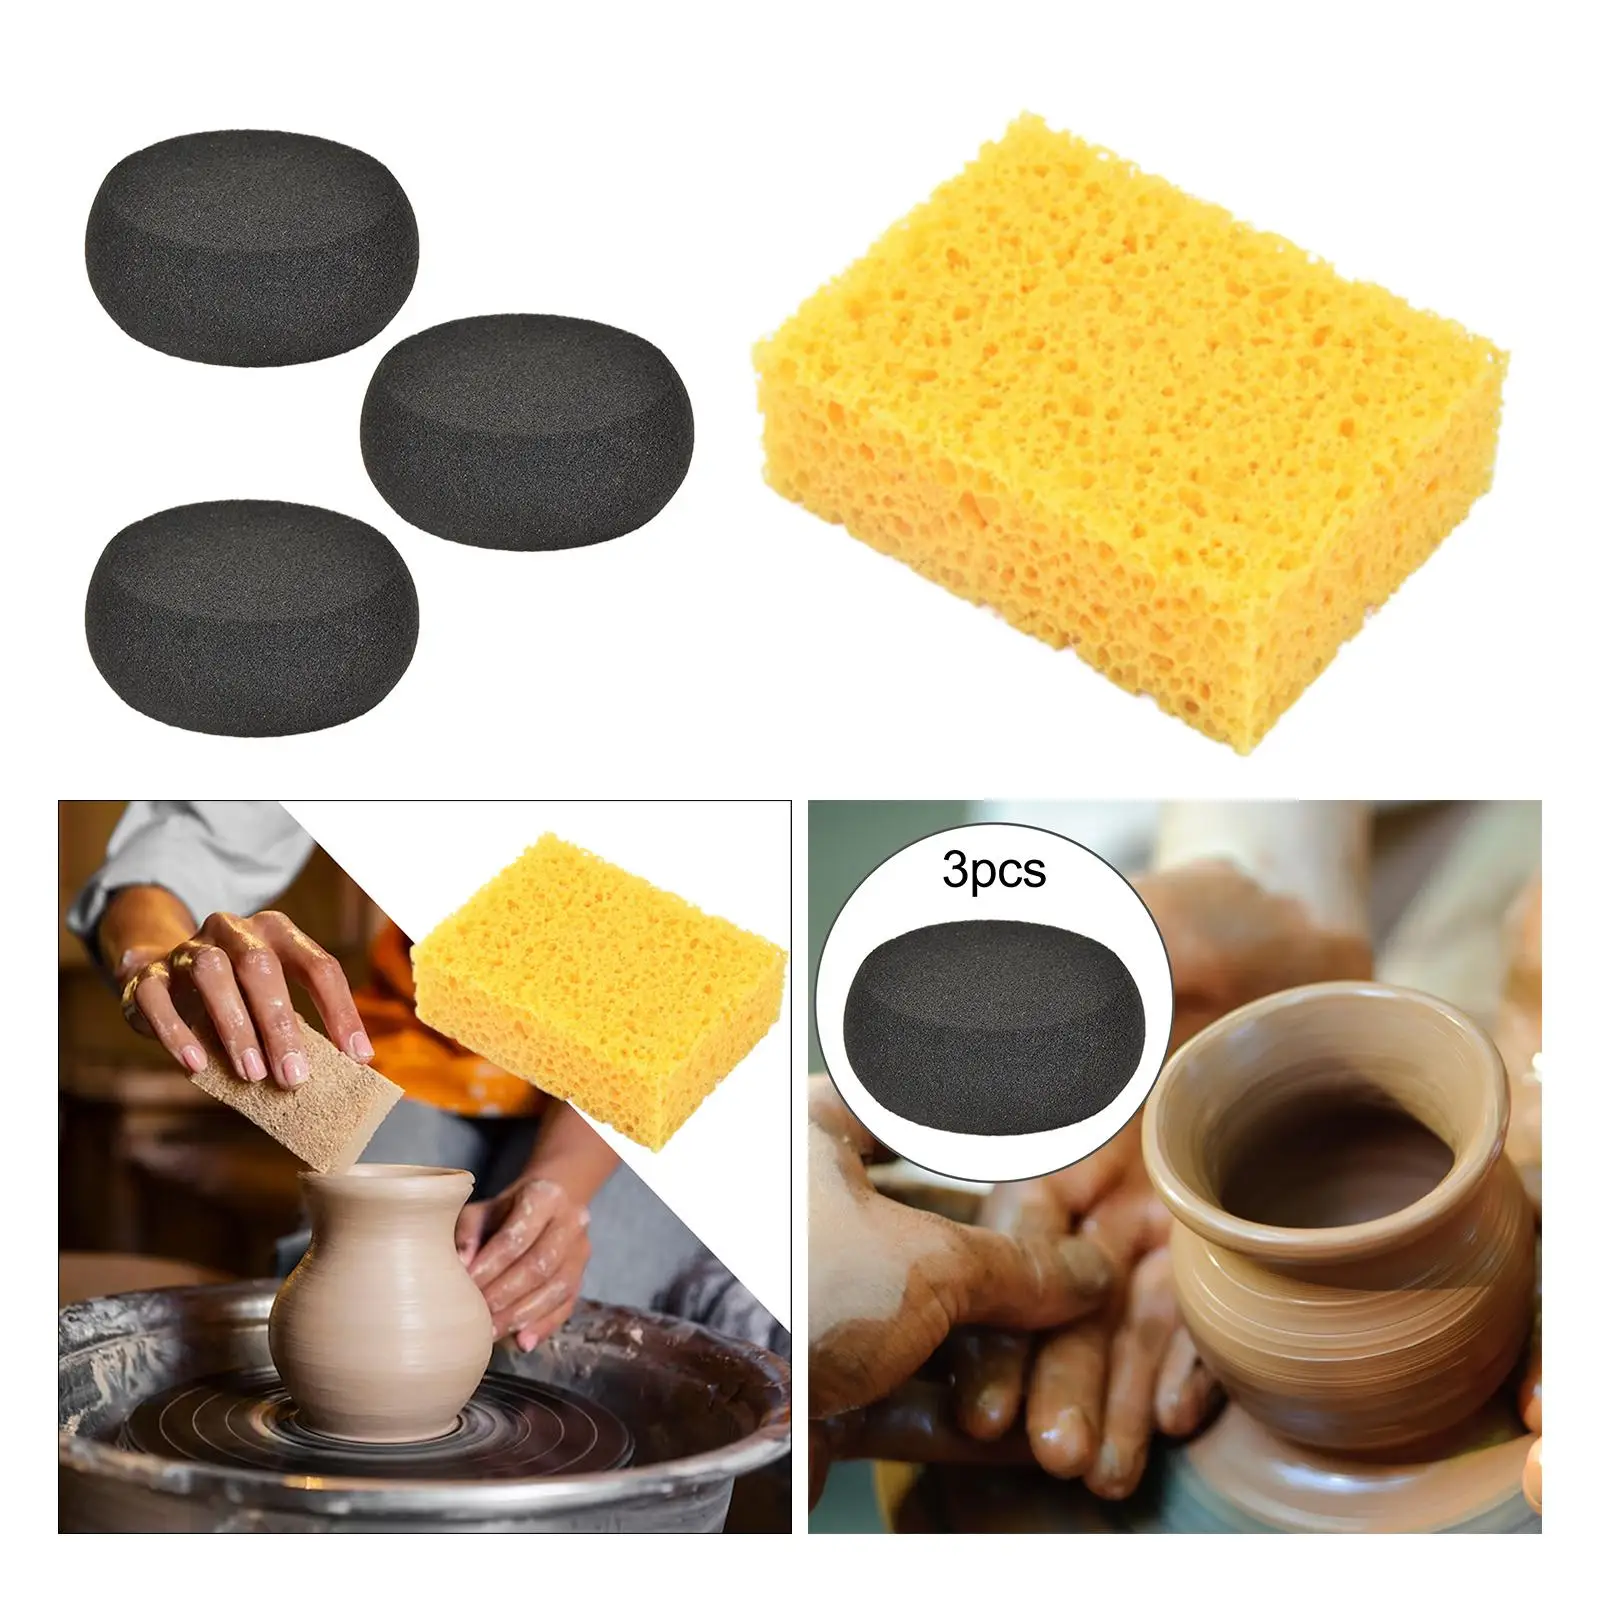 Painting Sponge Reusable Clay Cleaning Art Crafts Pottery Clay Ceramics Portable Water Absorbing Art Sponge Watercolor Sponge